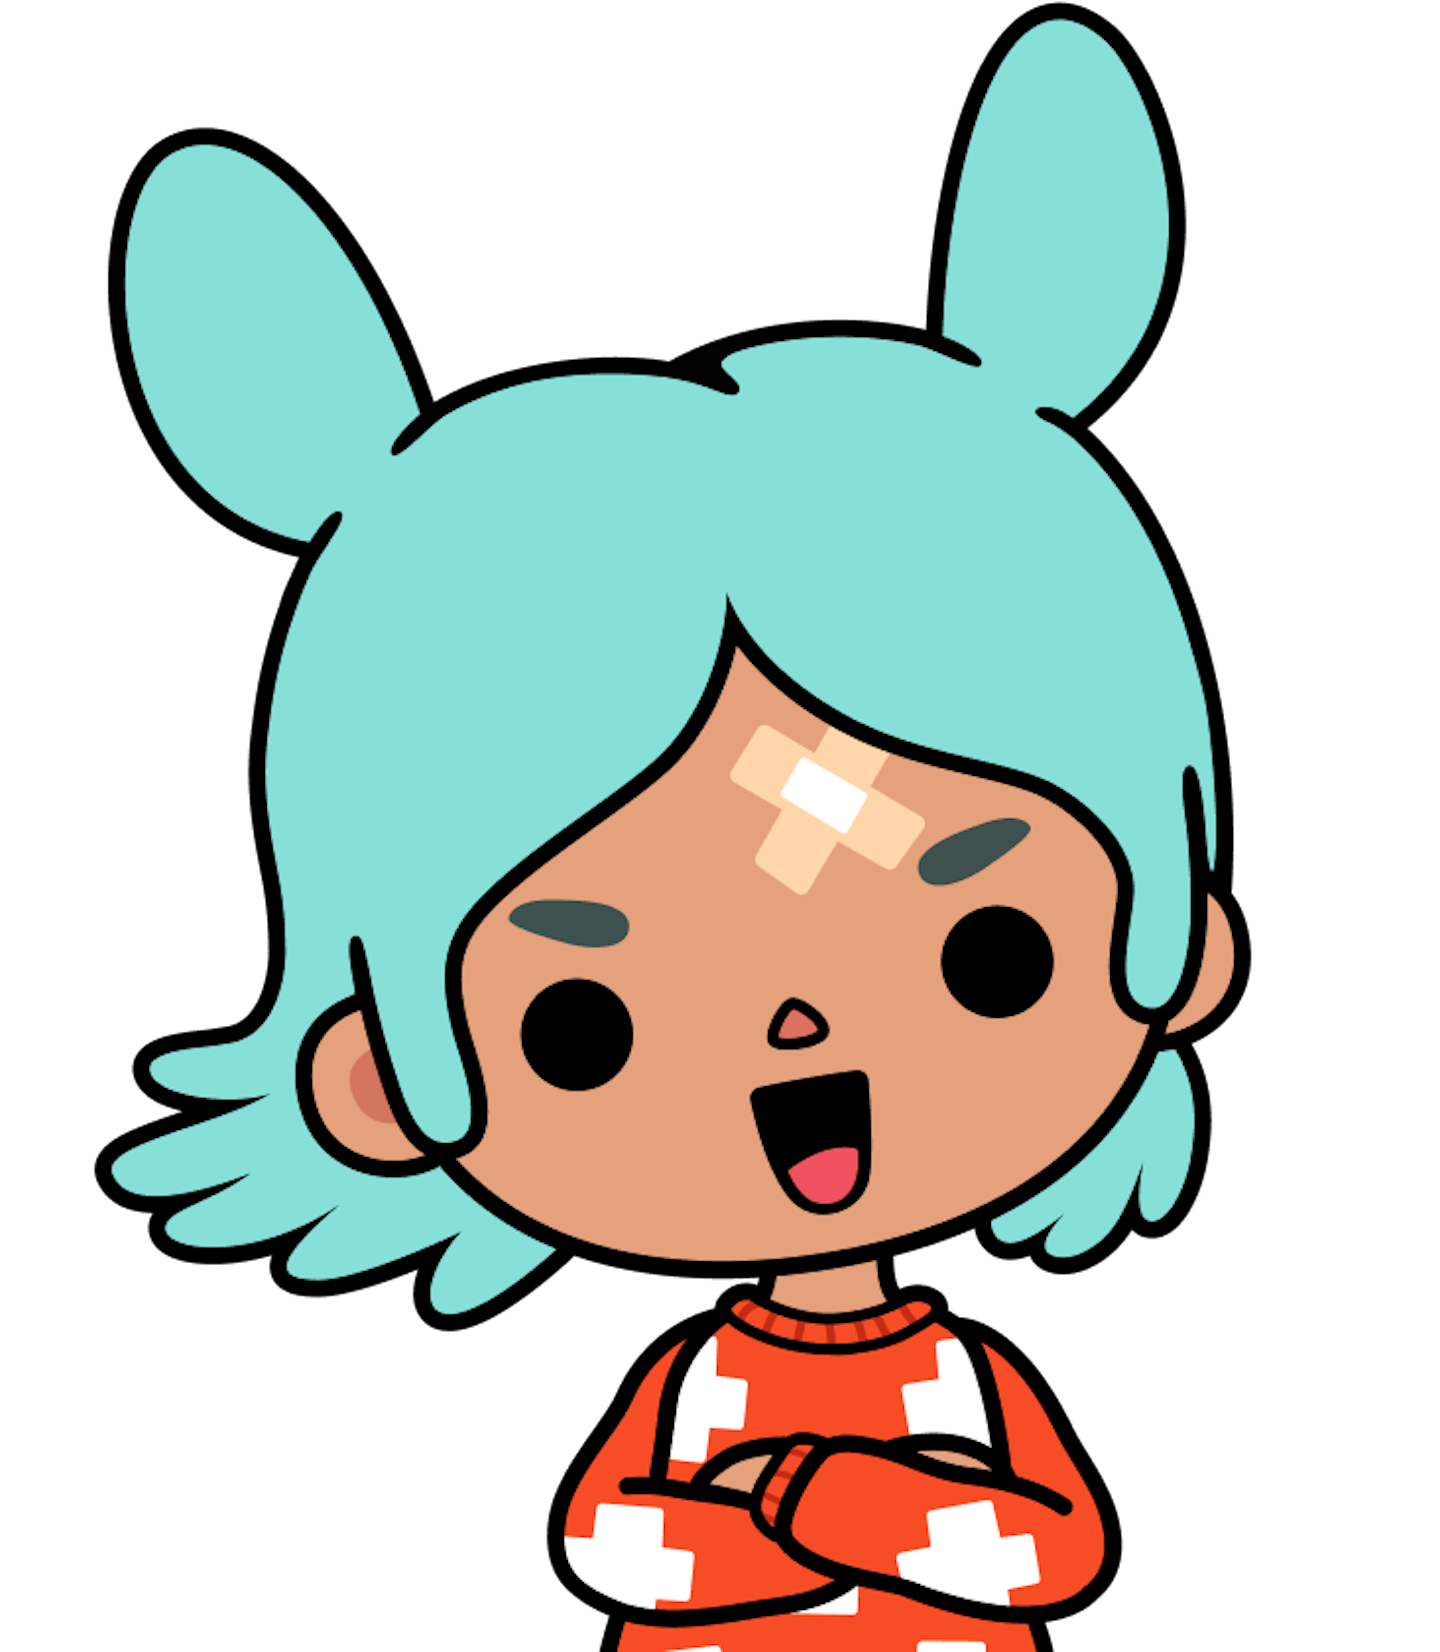 This is an image of Rita from Toca Boca World